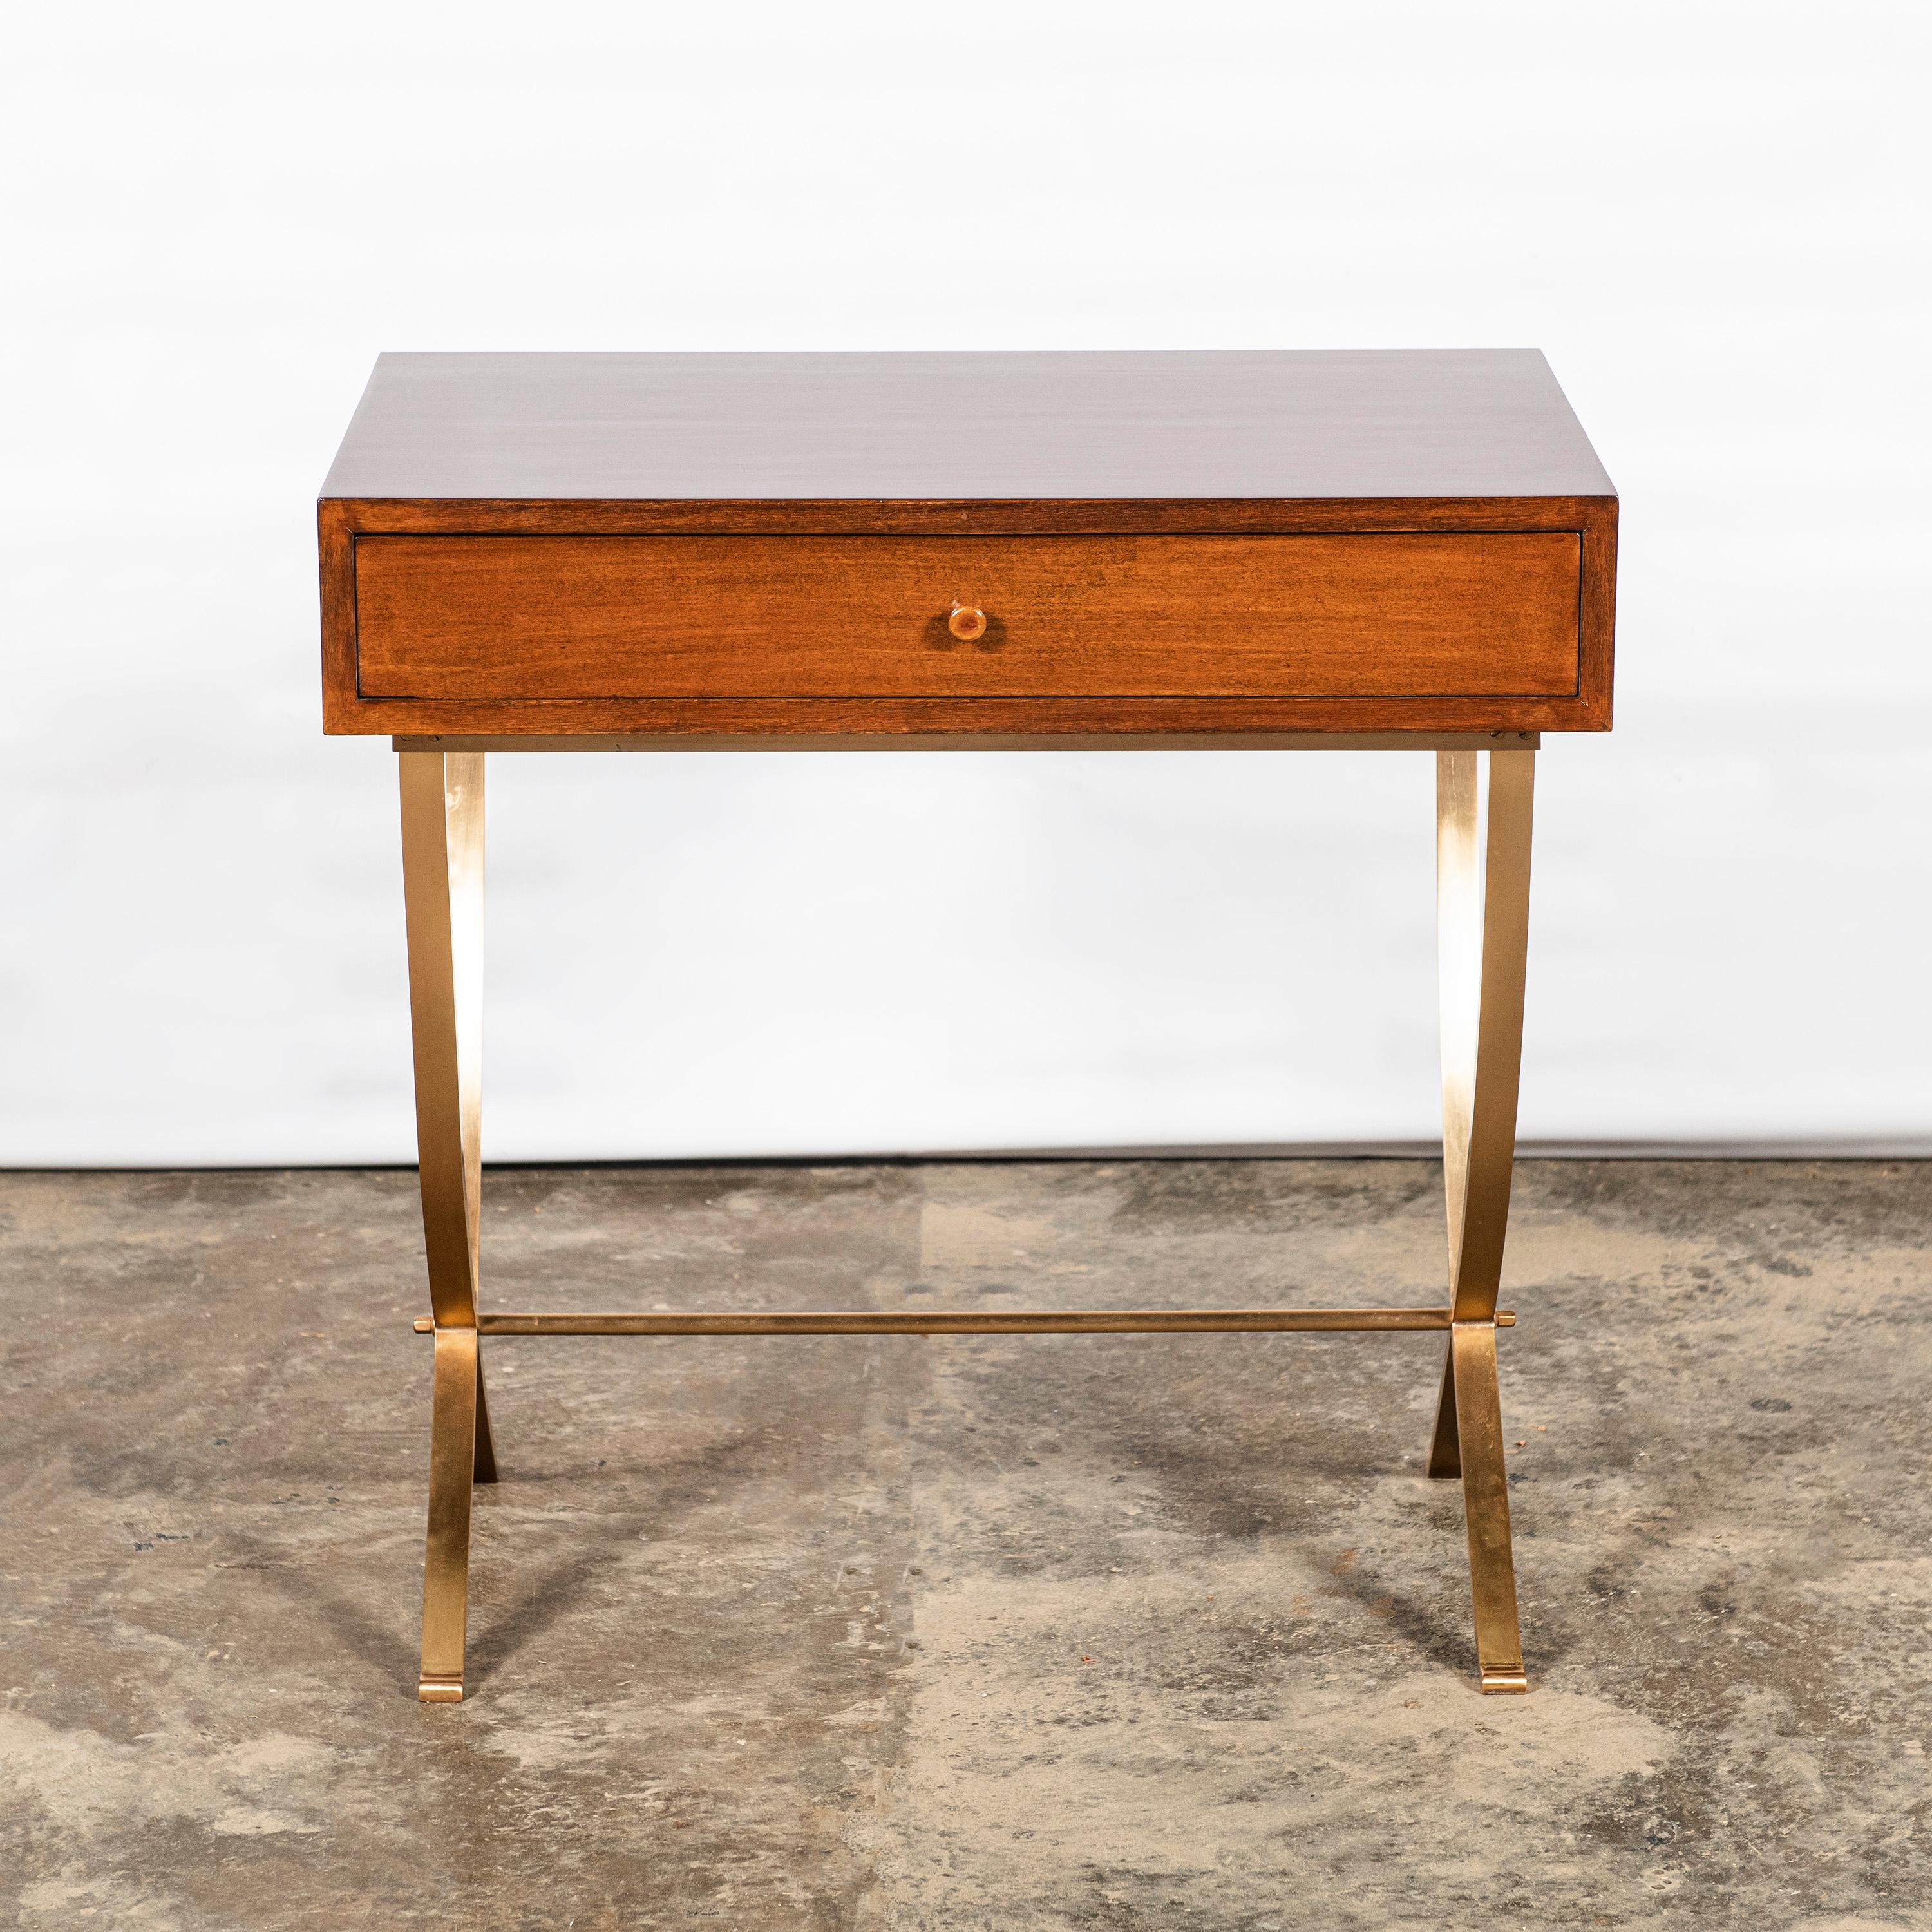 Wood and bronze console table by Comte. Argentina, Buenos Aires, circa 1950.